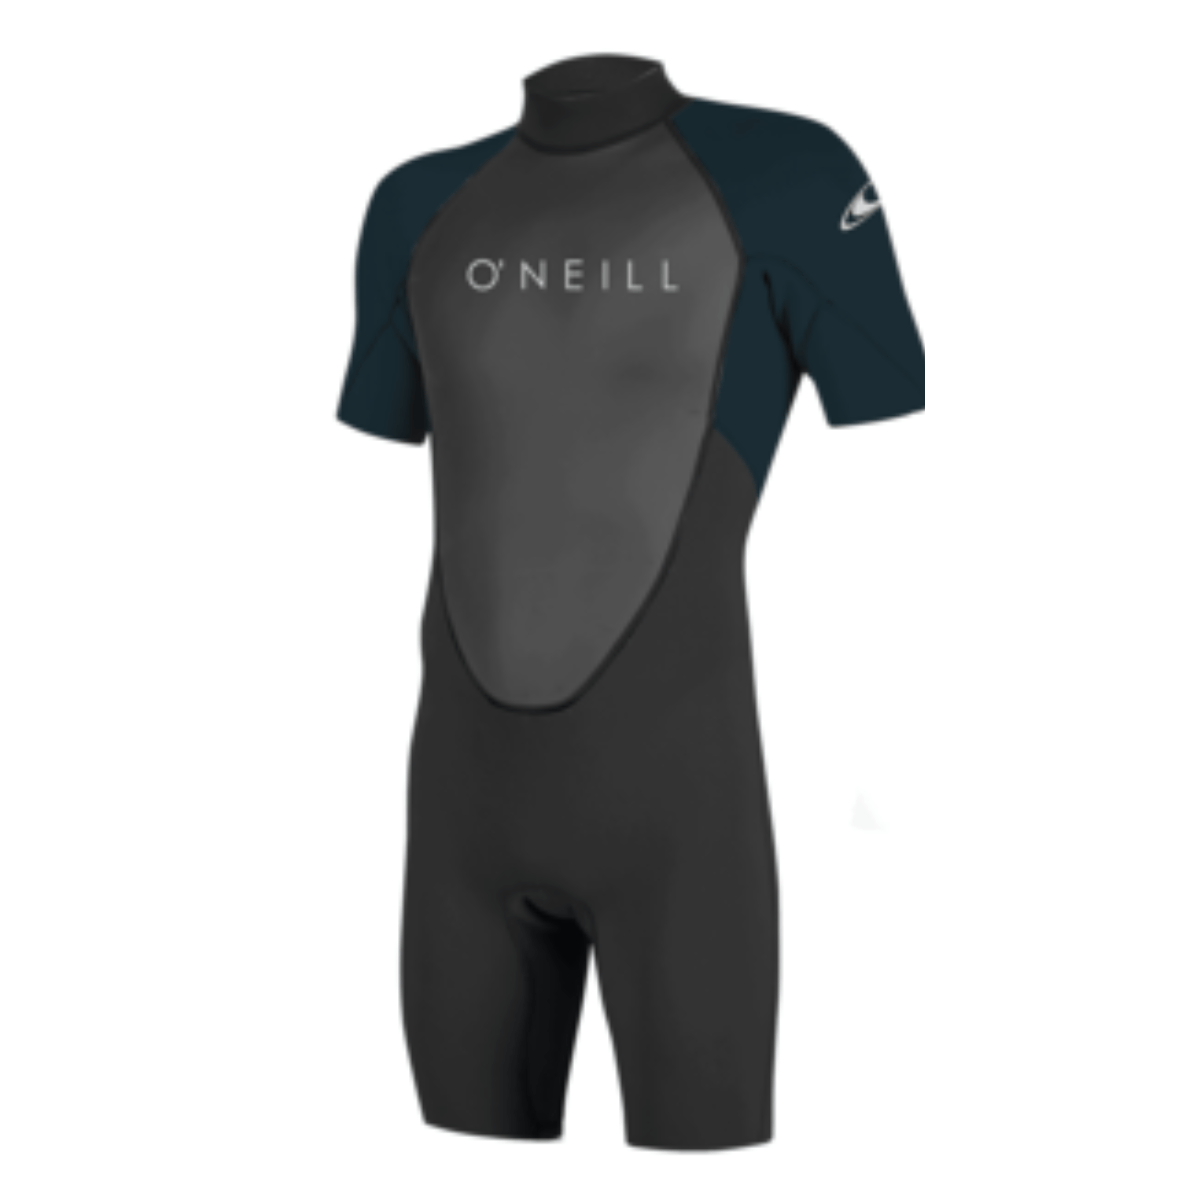 Oneill Reactor-2 2mm Back Zip Spring Wetsuit in Black and Slate - BoardCo